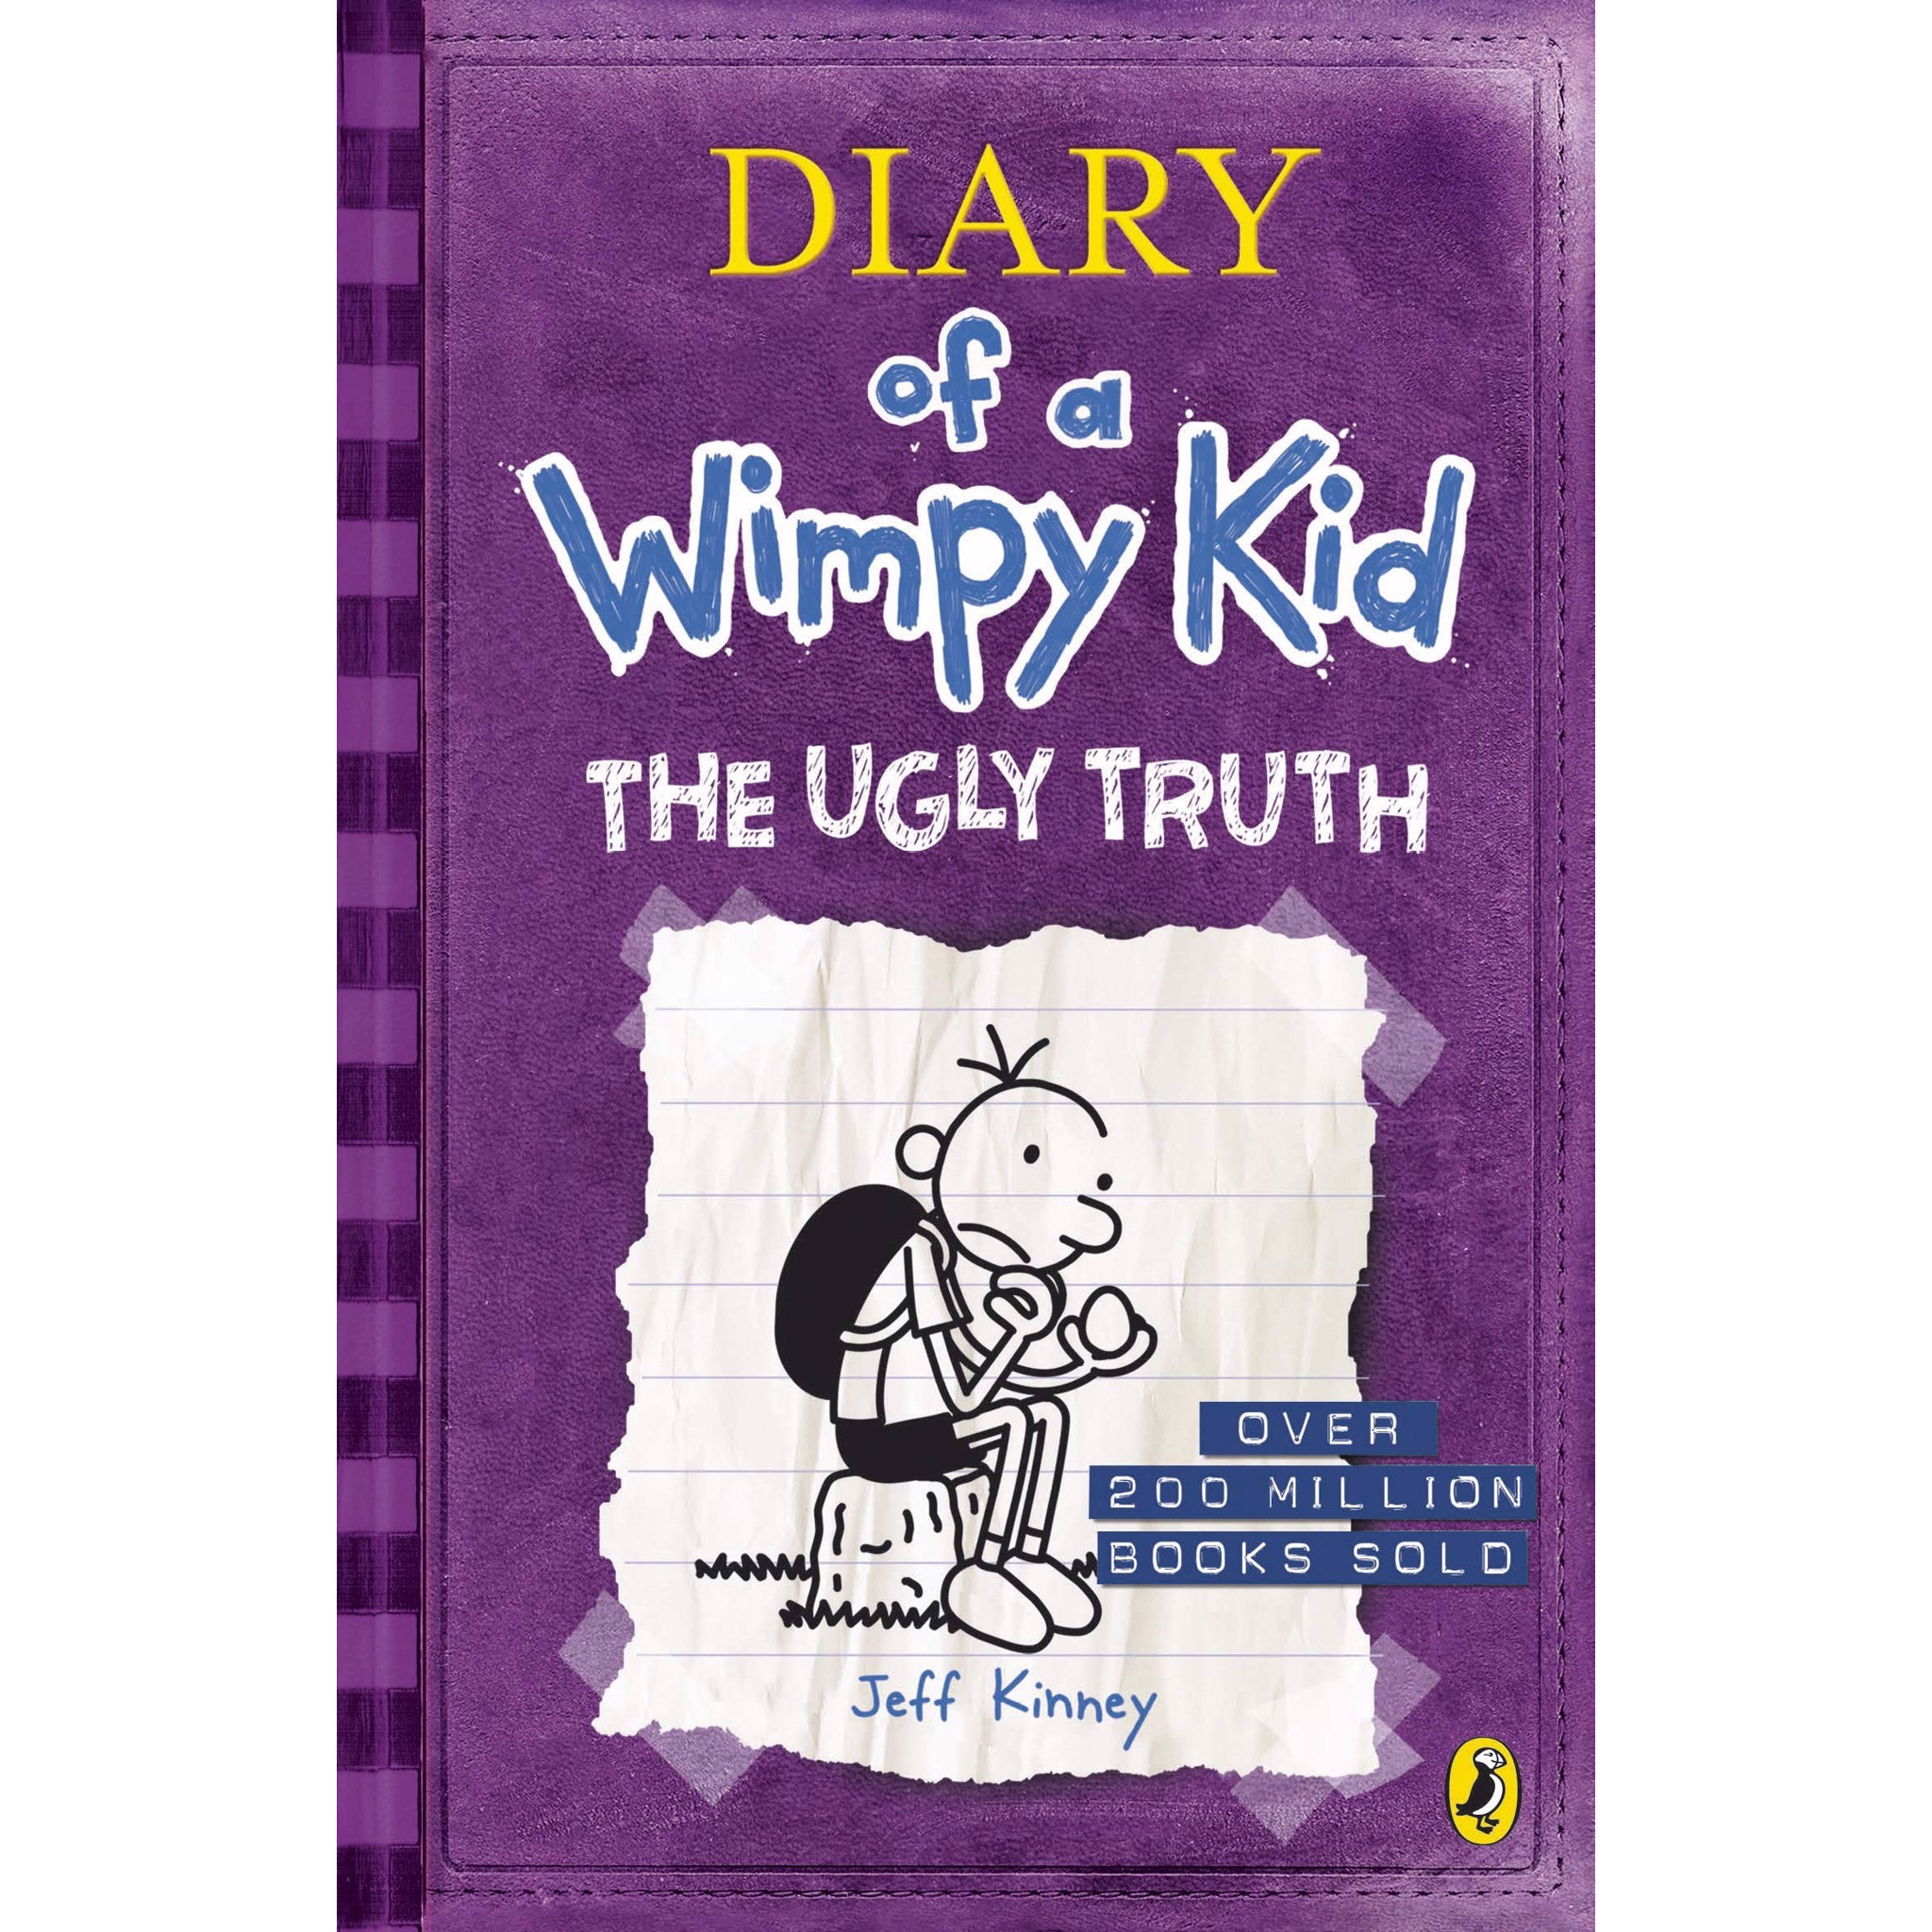 Diary of a Wimpy Kid 5: The Ugly Truth